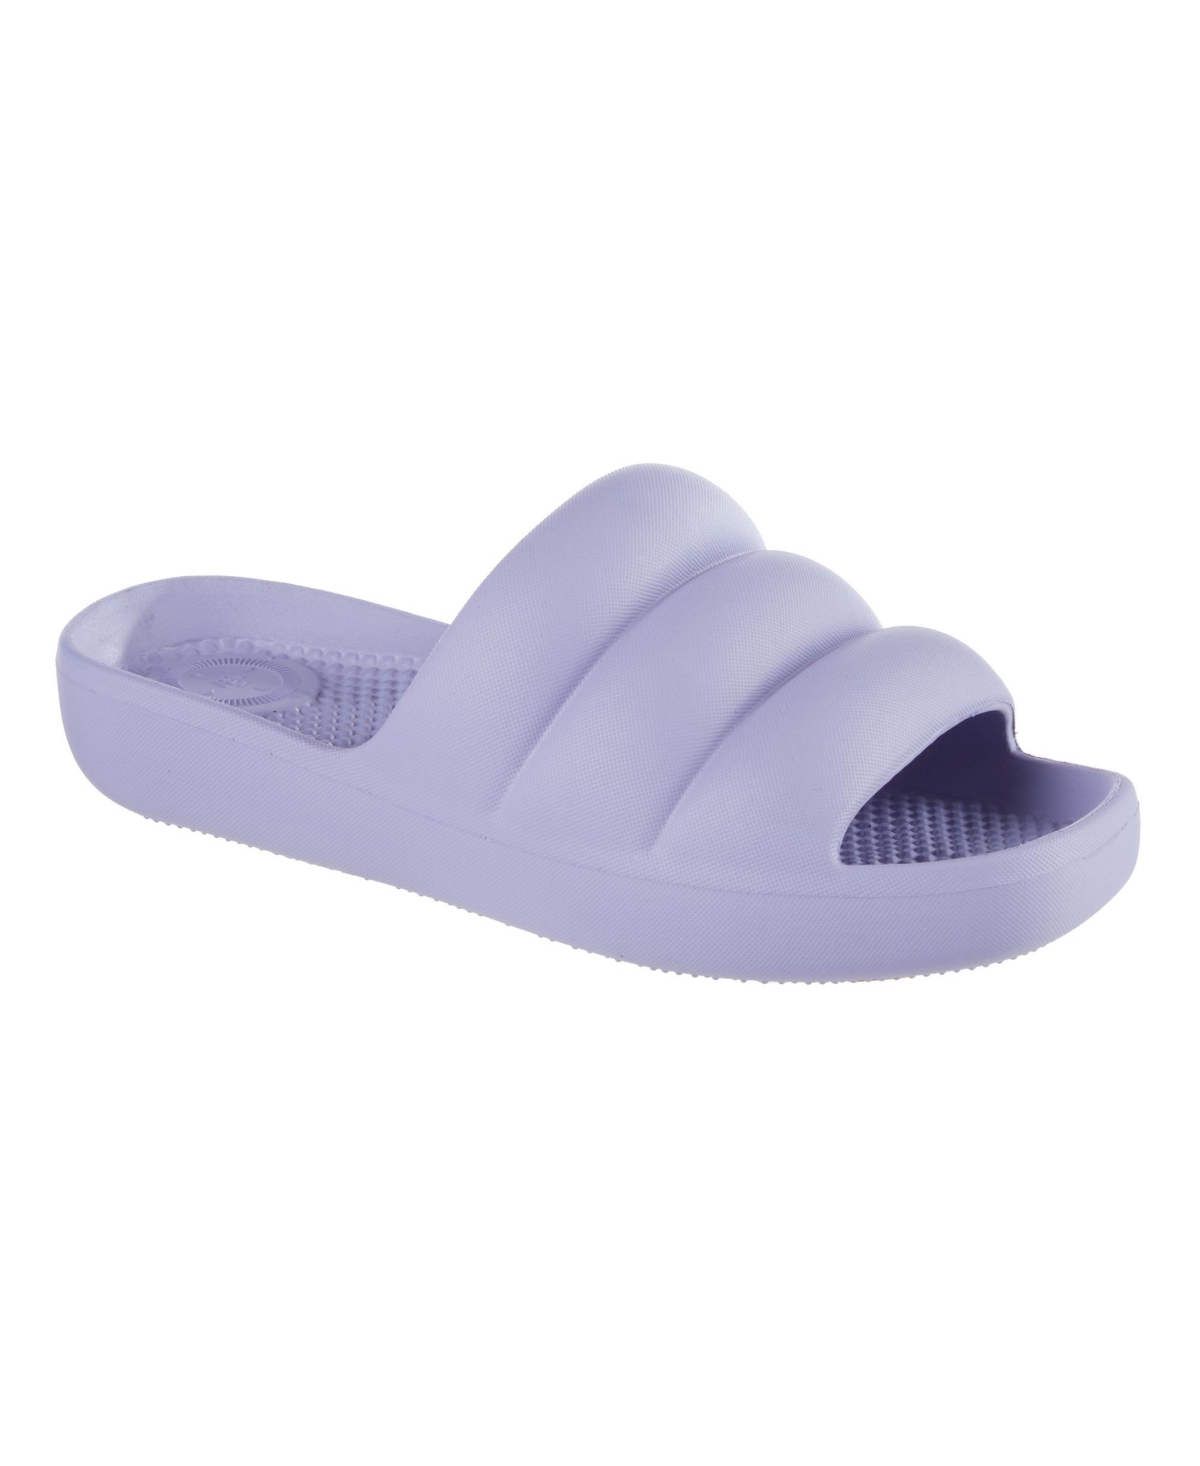 Women's Molded Puffy Slide with Everywear - White